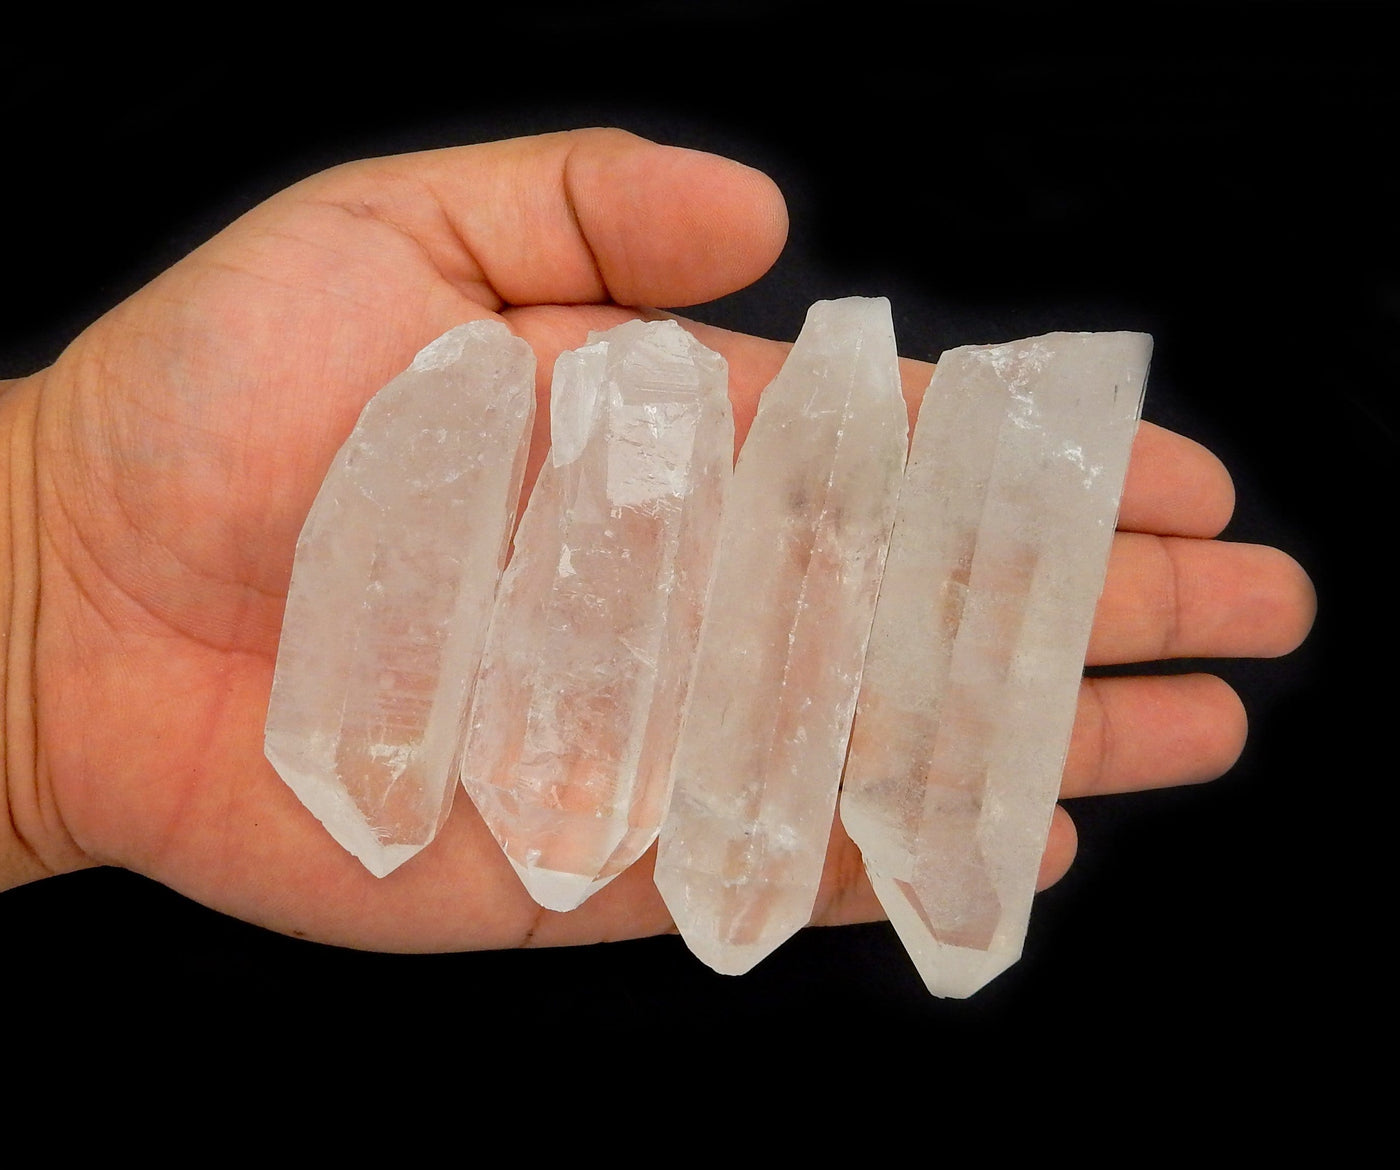 Sampleing of crystal points in a hand for size reference